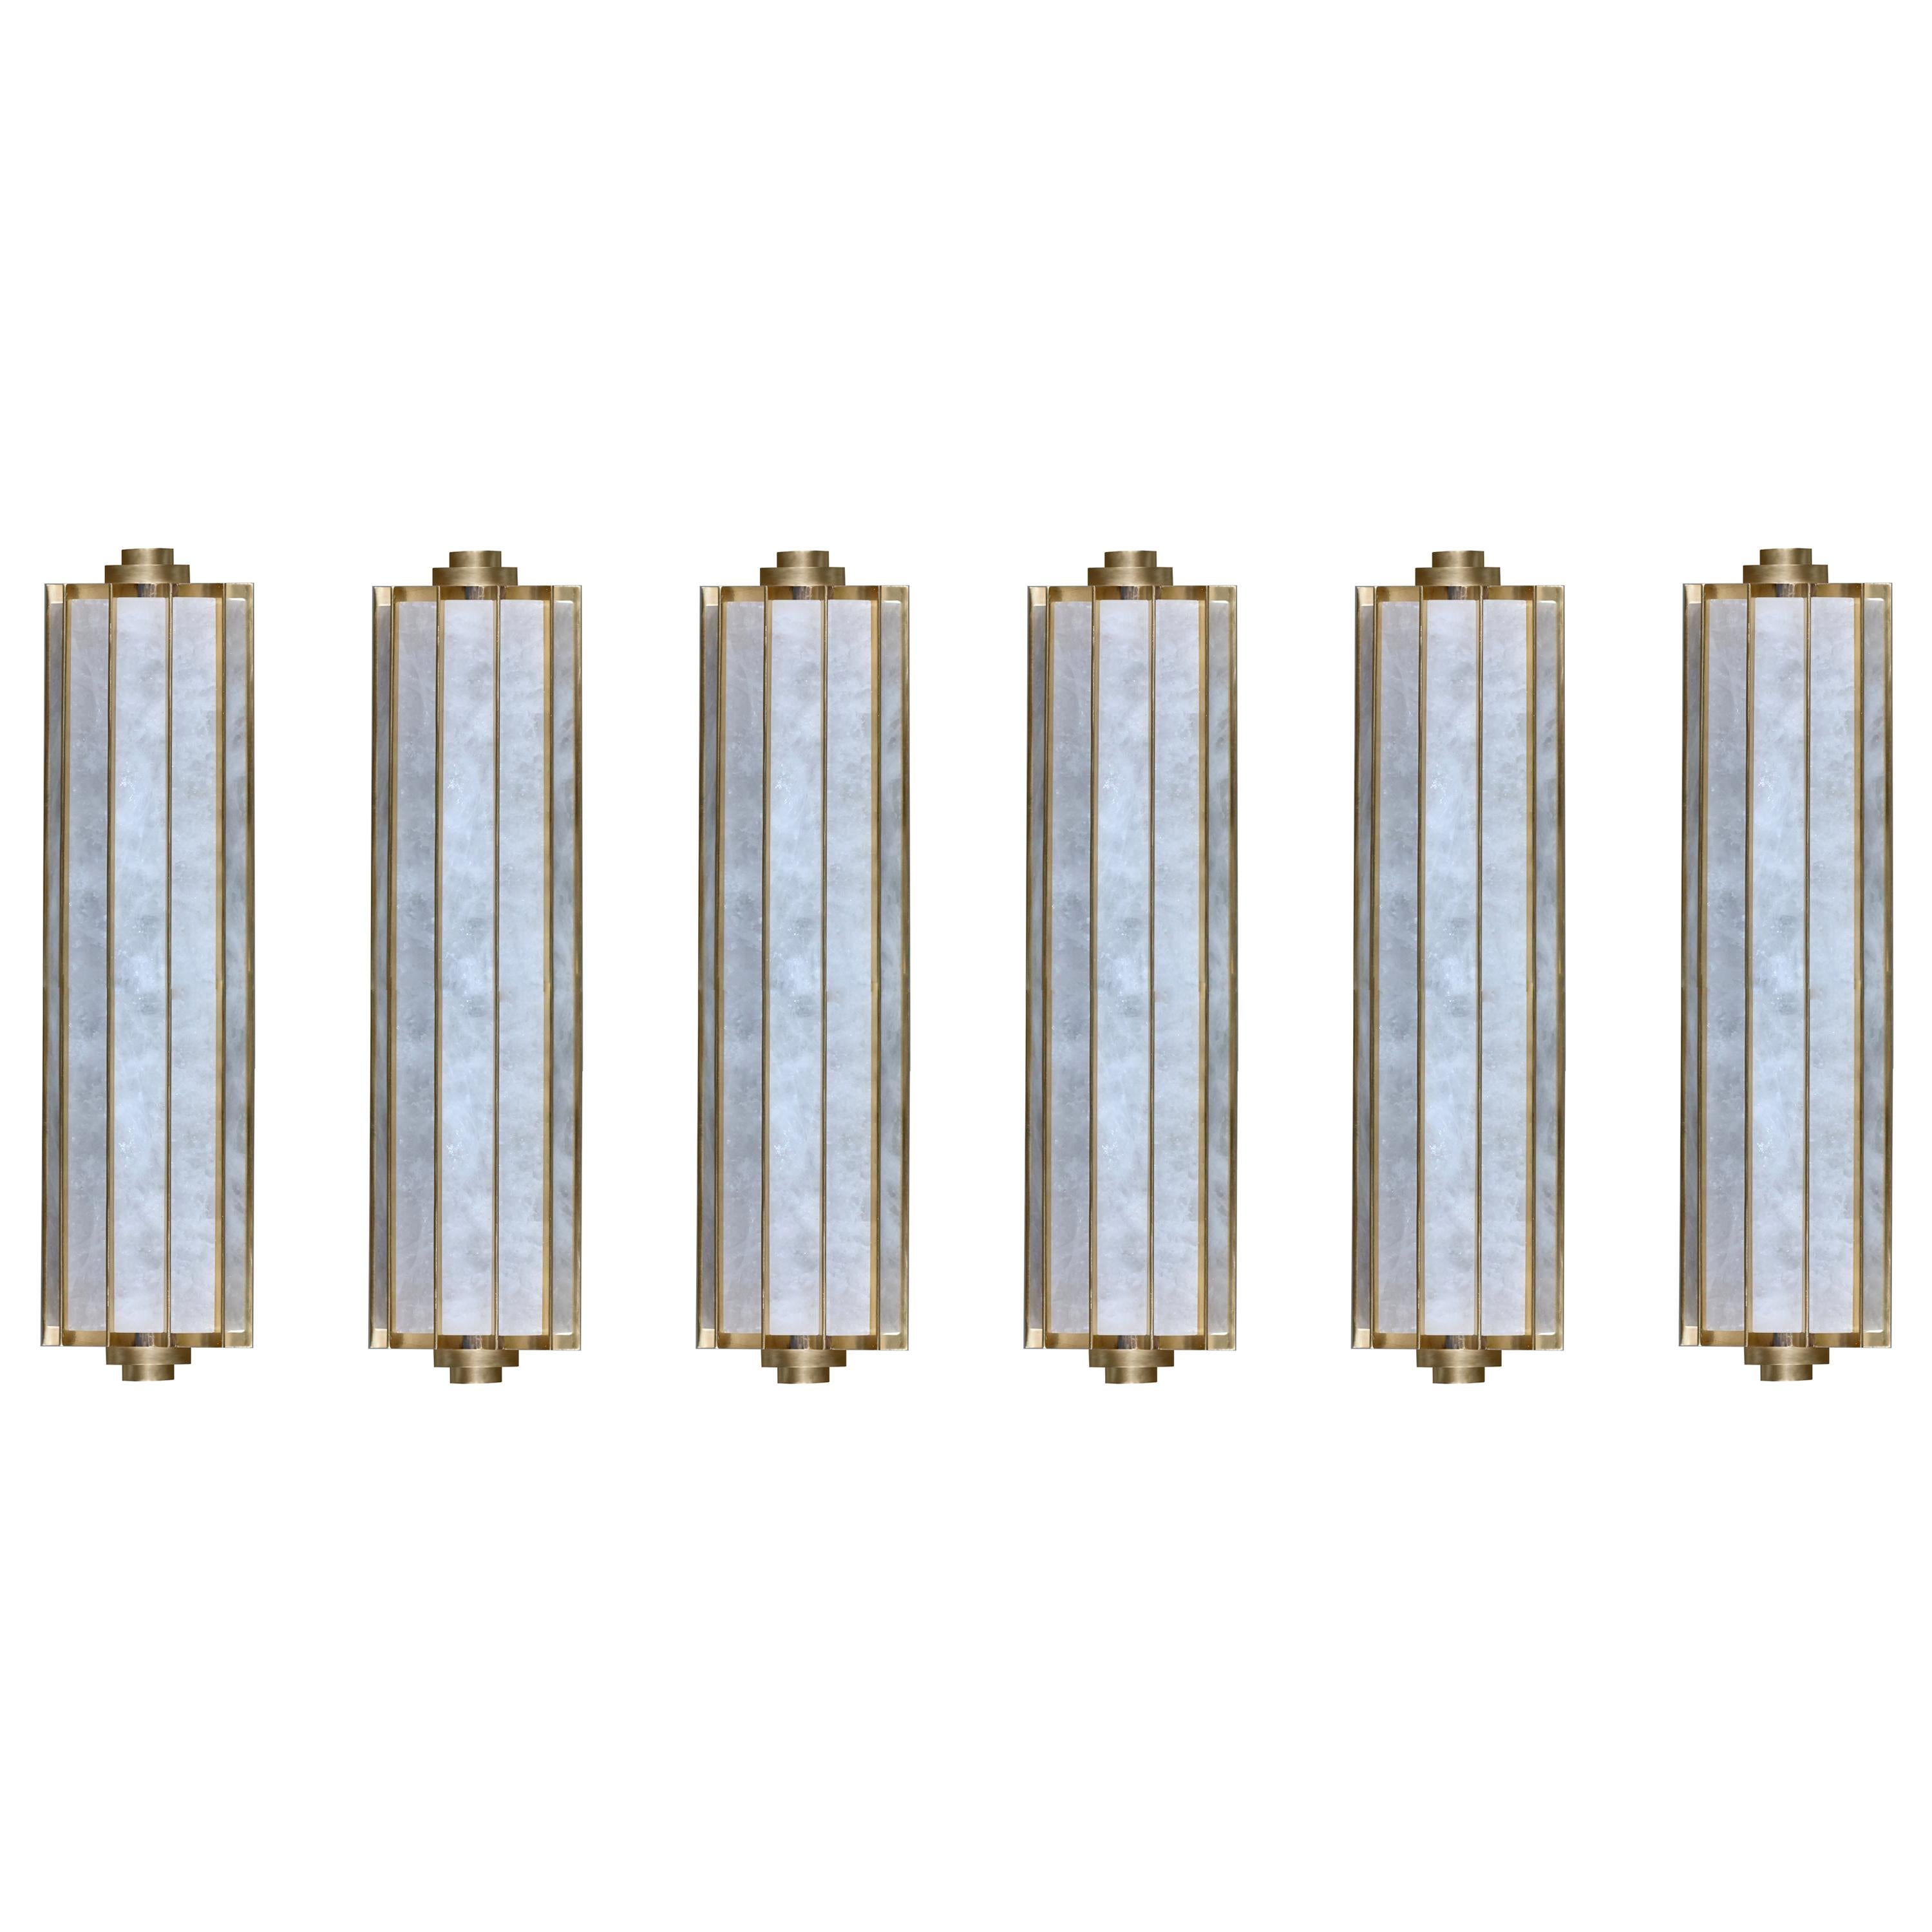 Group of Six Lumiere Rock Crystal Sconces by Phoenix